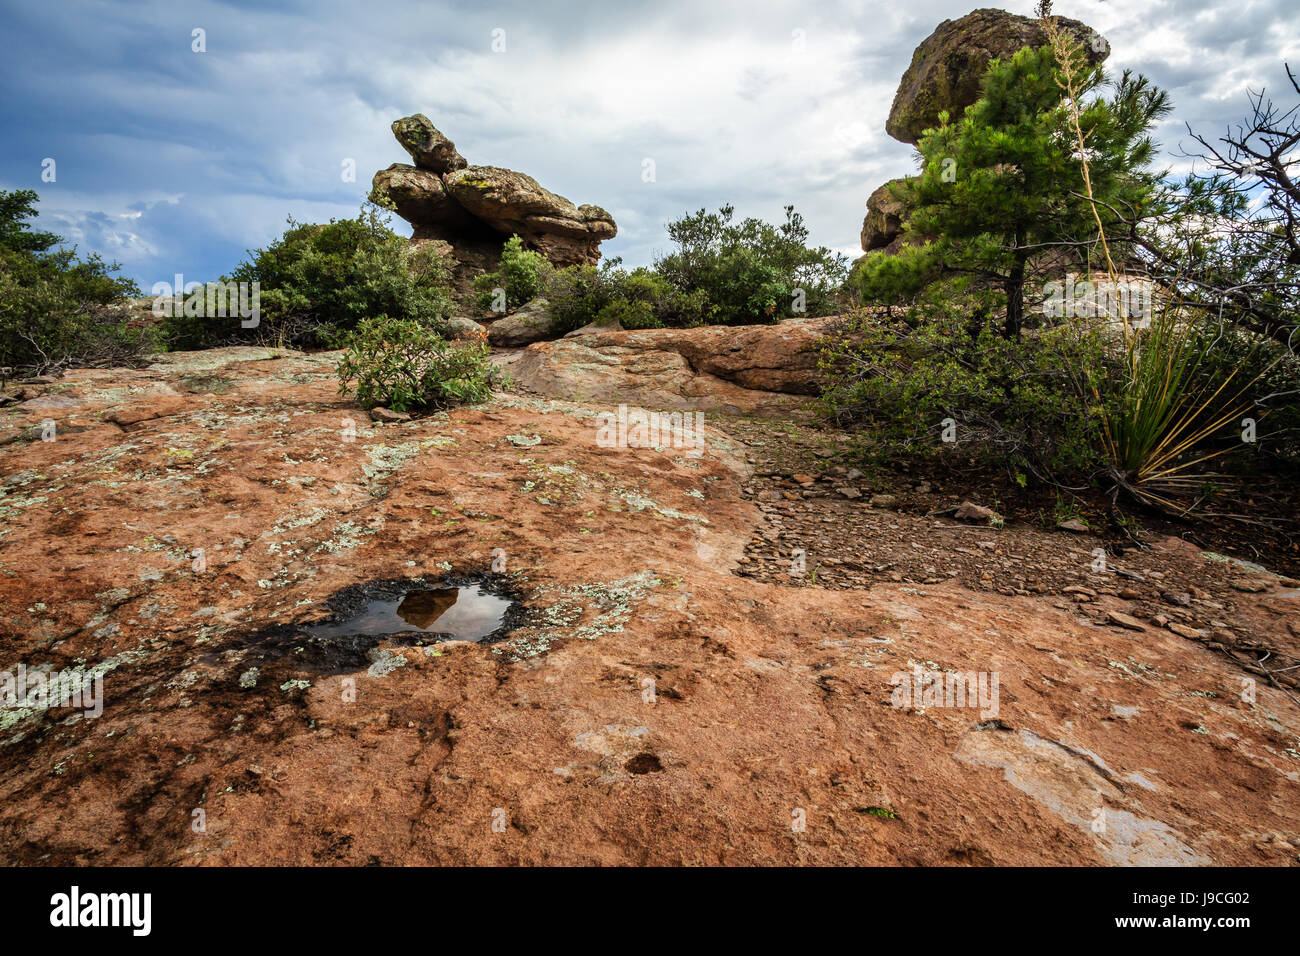 Reflecting pools are scarce in this rugged terrain in Chiricahua National Monument of southeastern Arizona. Stock Photo